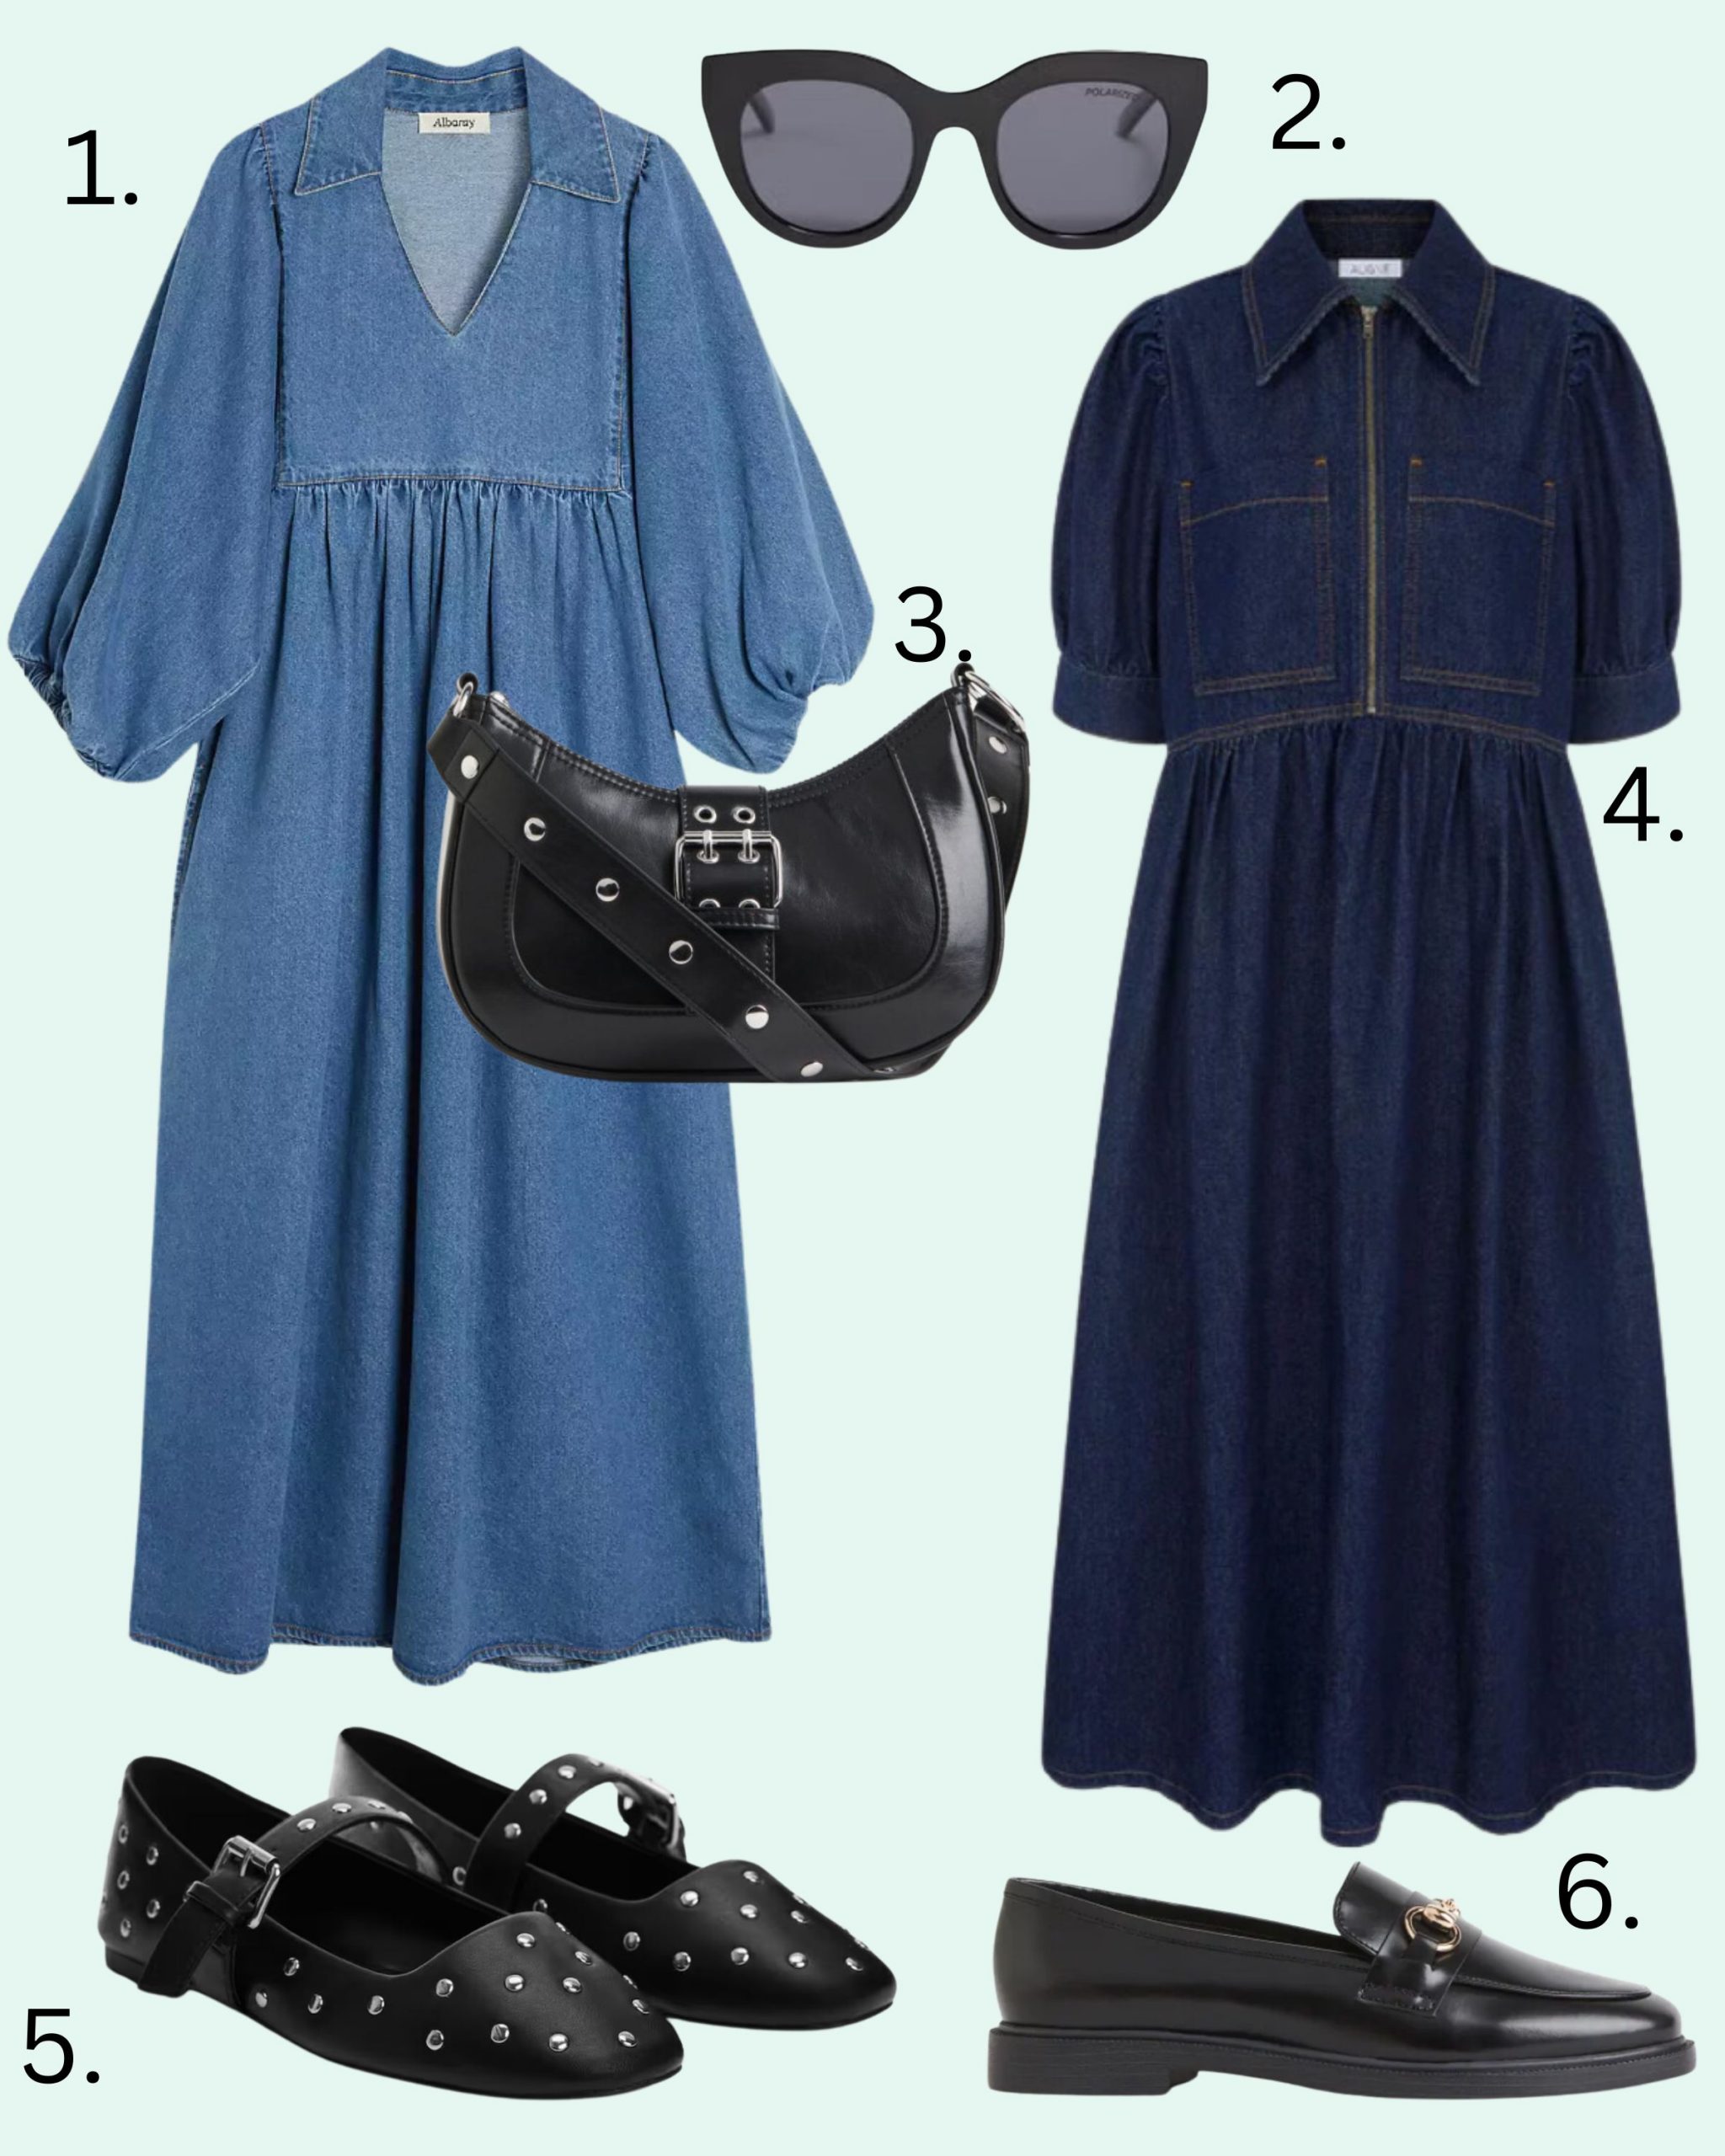 7 outfit ideas for March. Denim dresses 